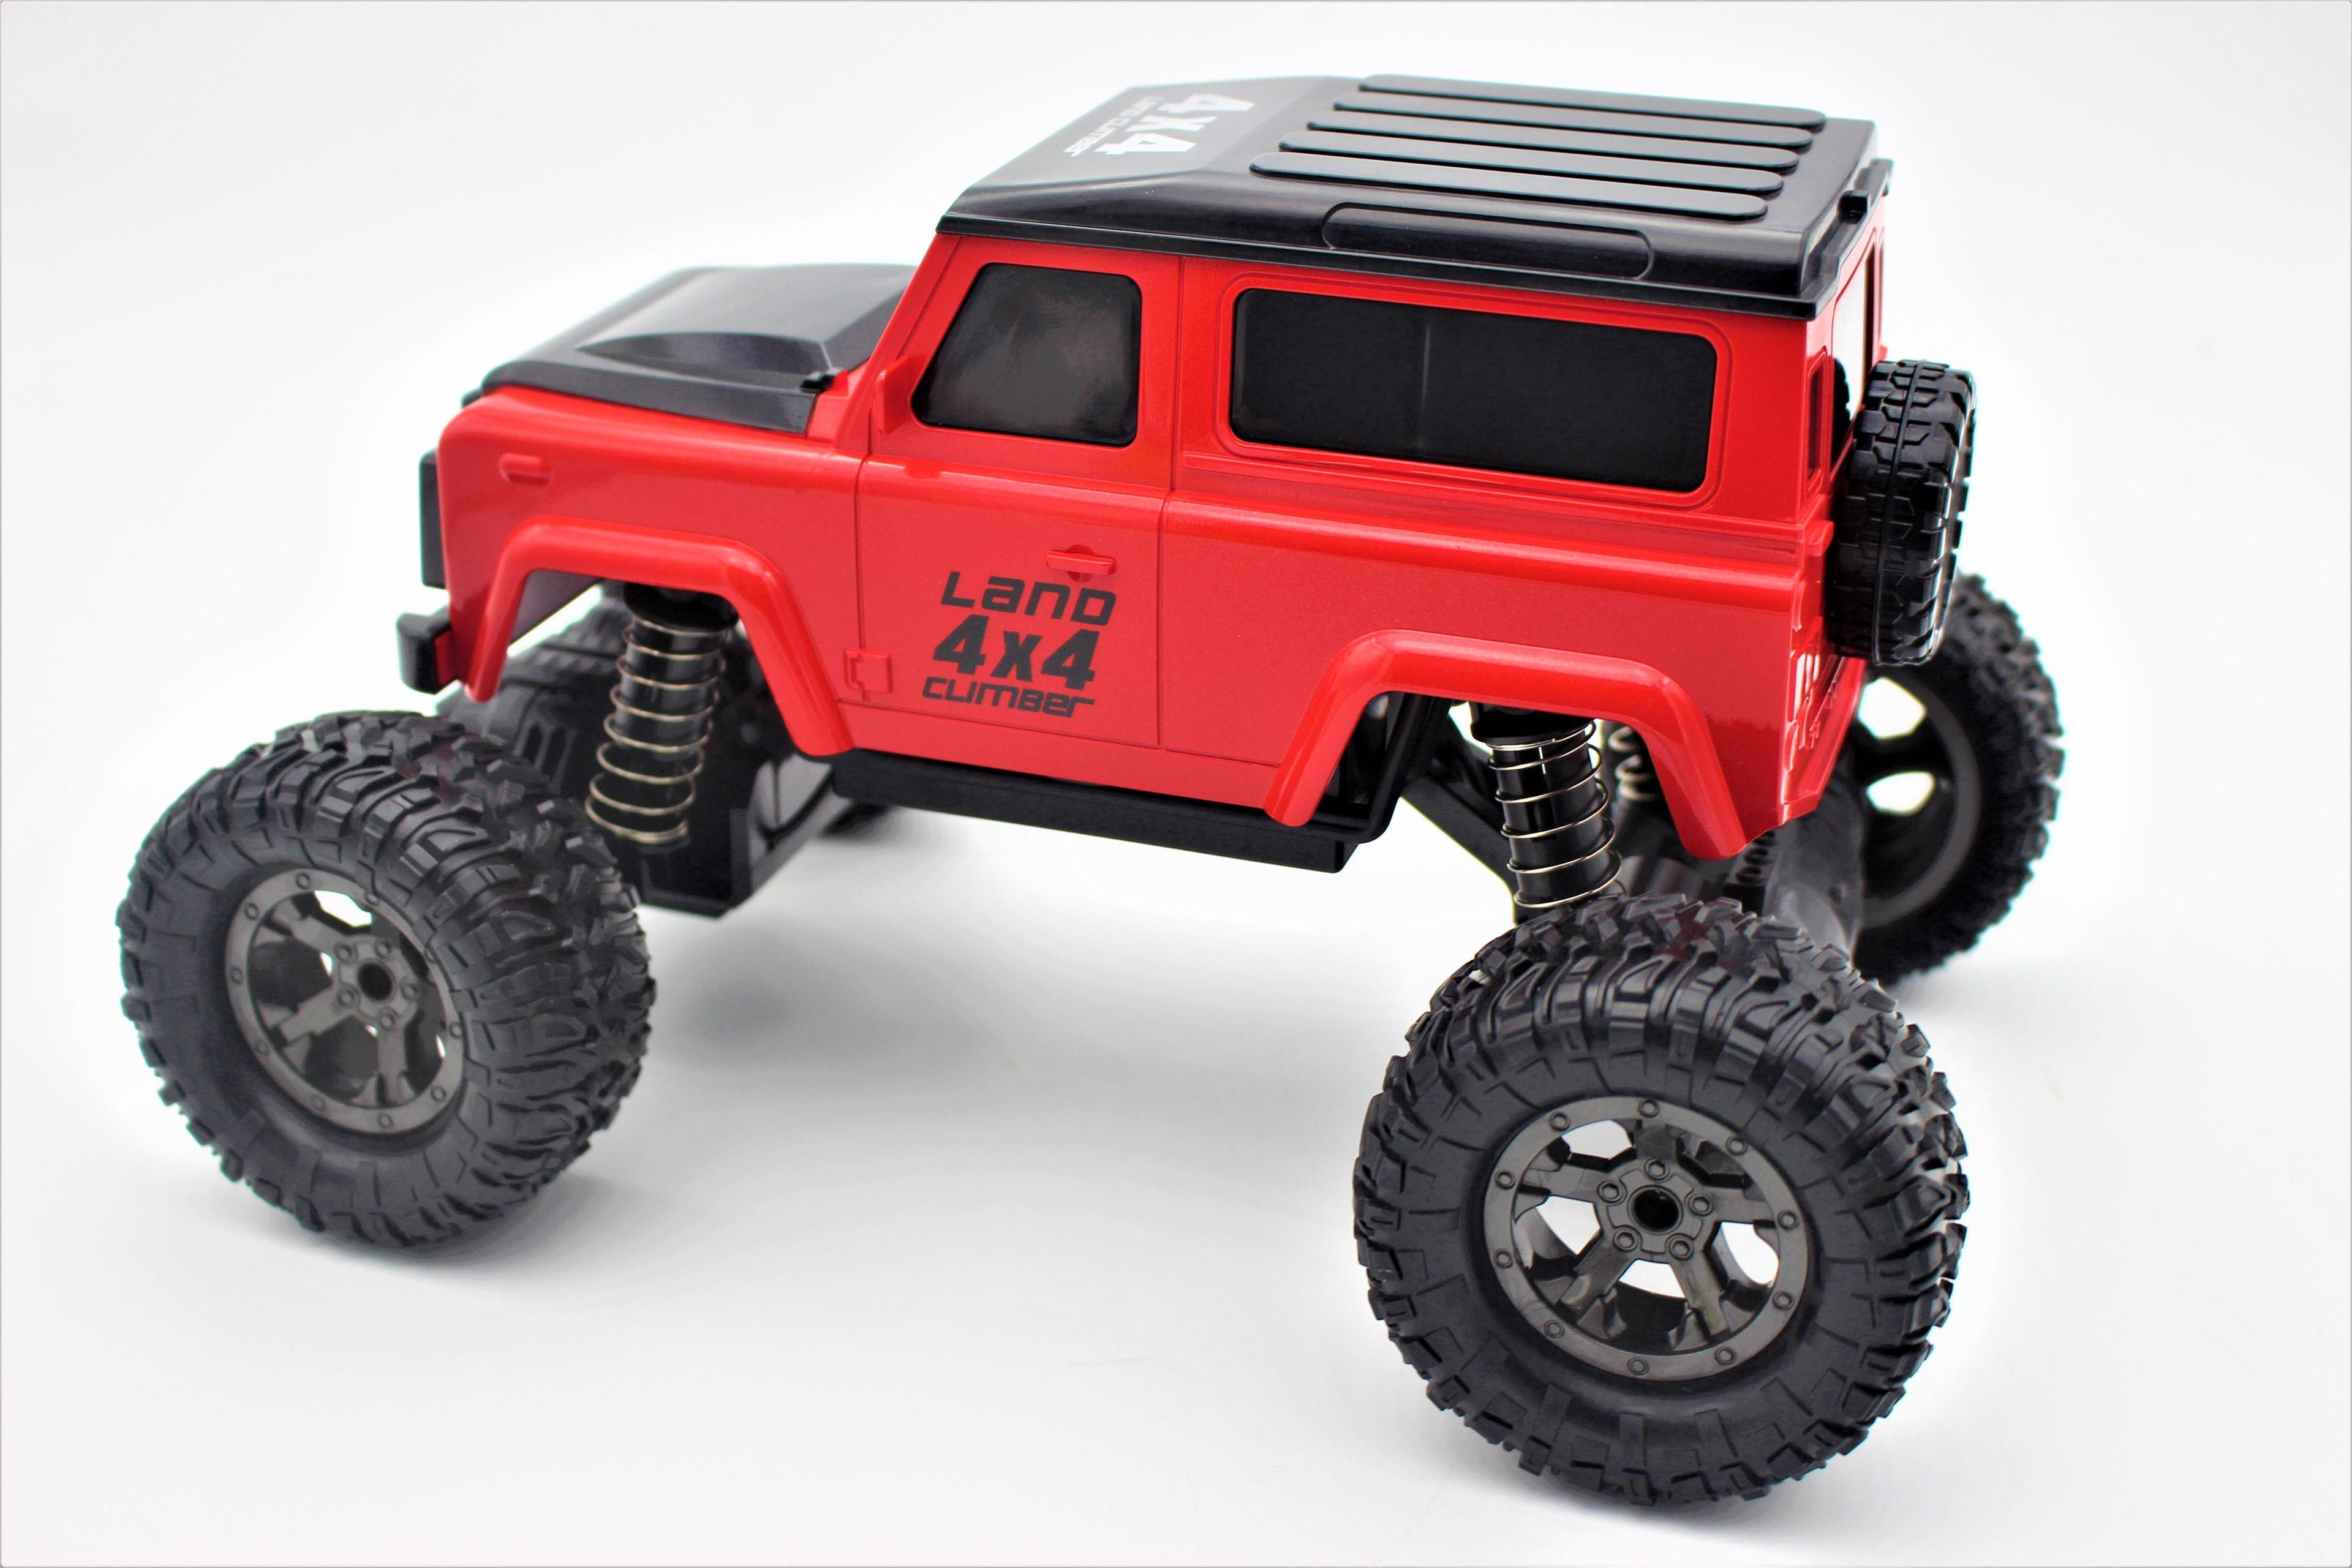 Big Foot Moster RC 2.4Ghz Remote Controlled Car